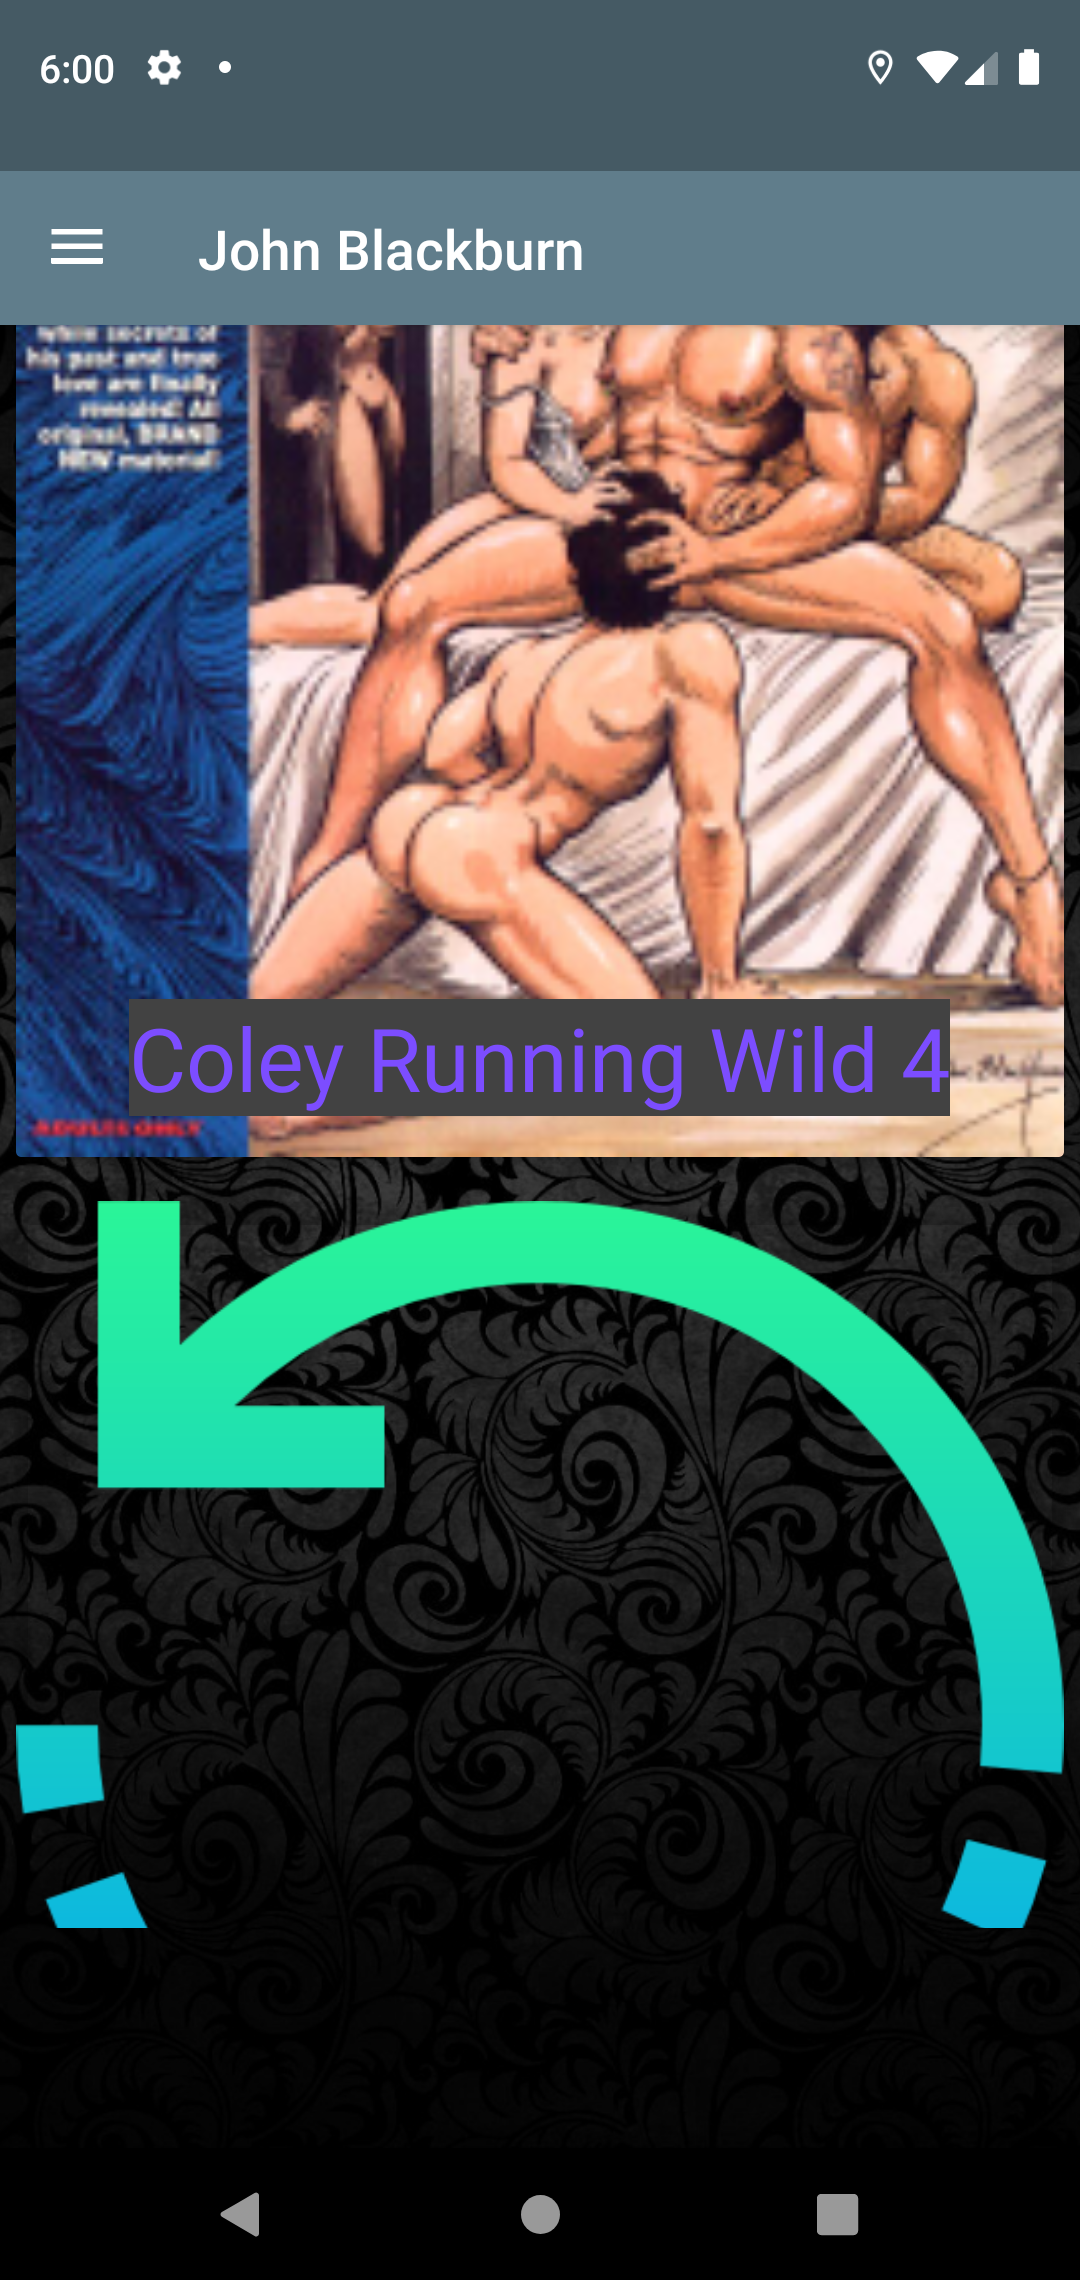 Coley Running Wild for,bondage,android,galleries,pornstar,adult,offline,comic,hentai,mature,porn,photo,comics,apps,download,gay,best,wallpapers,app,anime,blackburn,apk,yaoi,john,gloryhole,picture,application